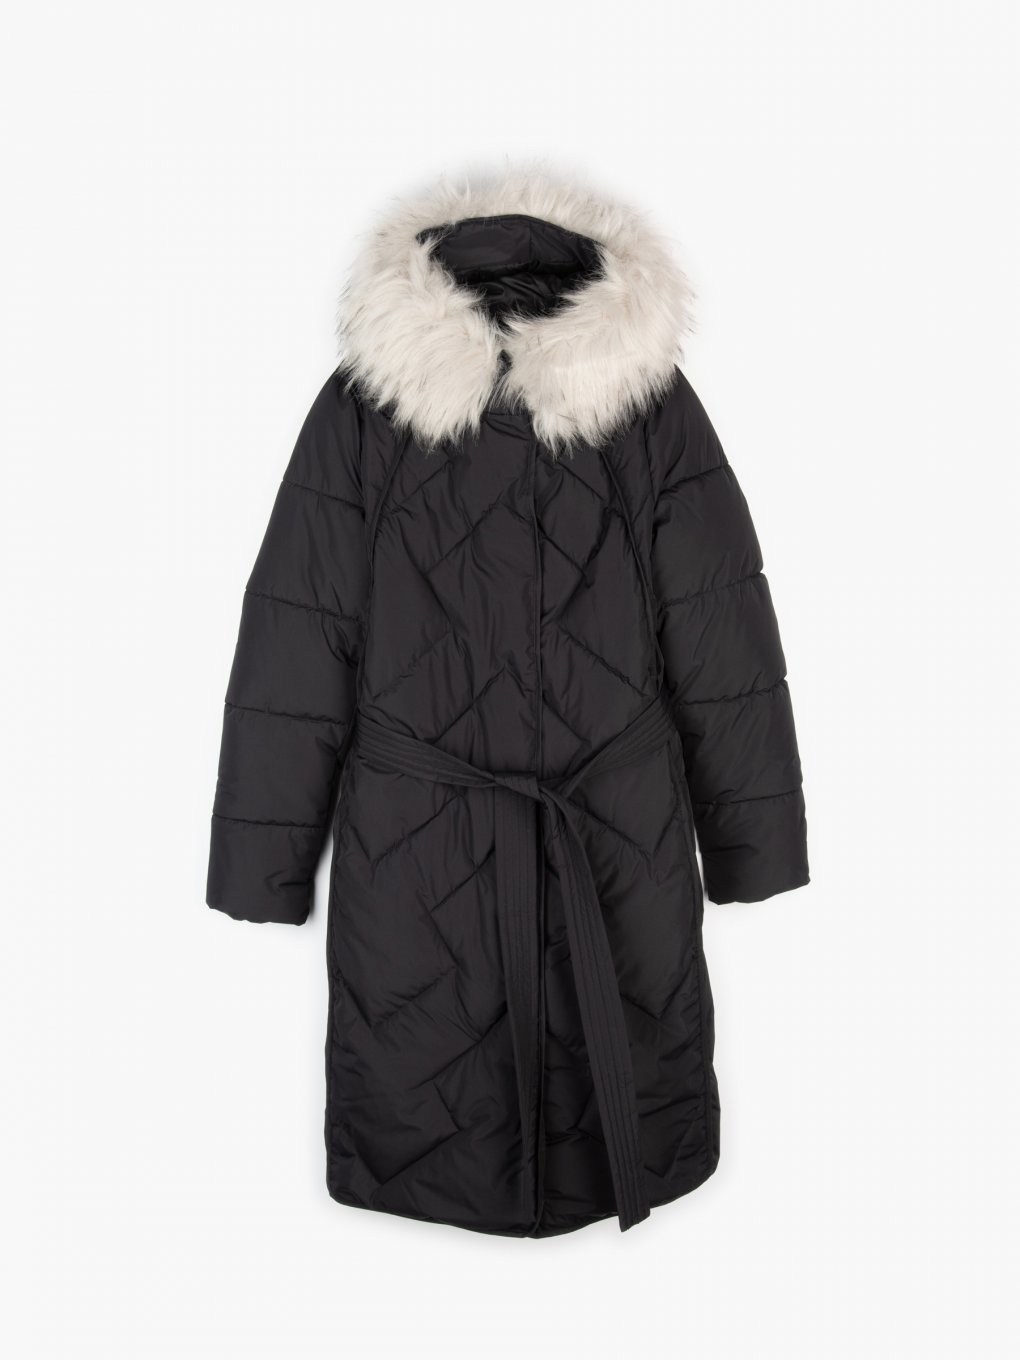 Quilted longline jacket with recycled polyester padding, fake fur on hood and belt